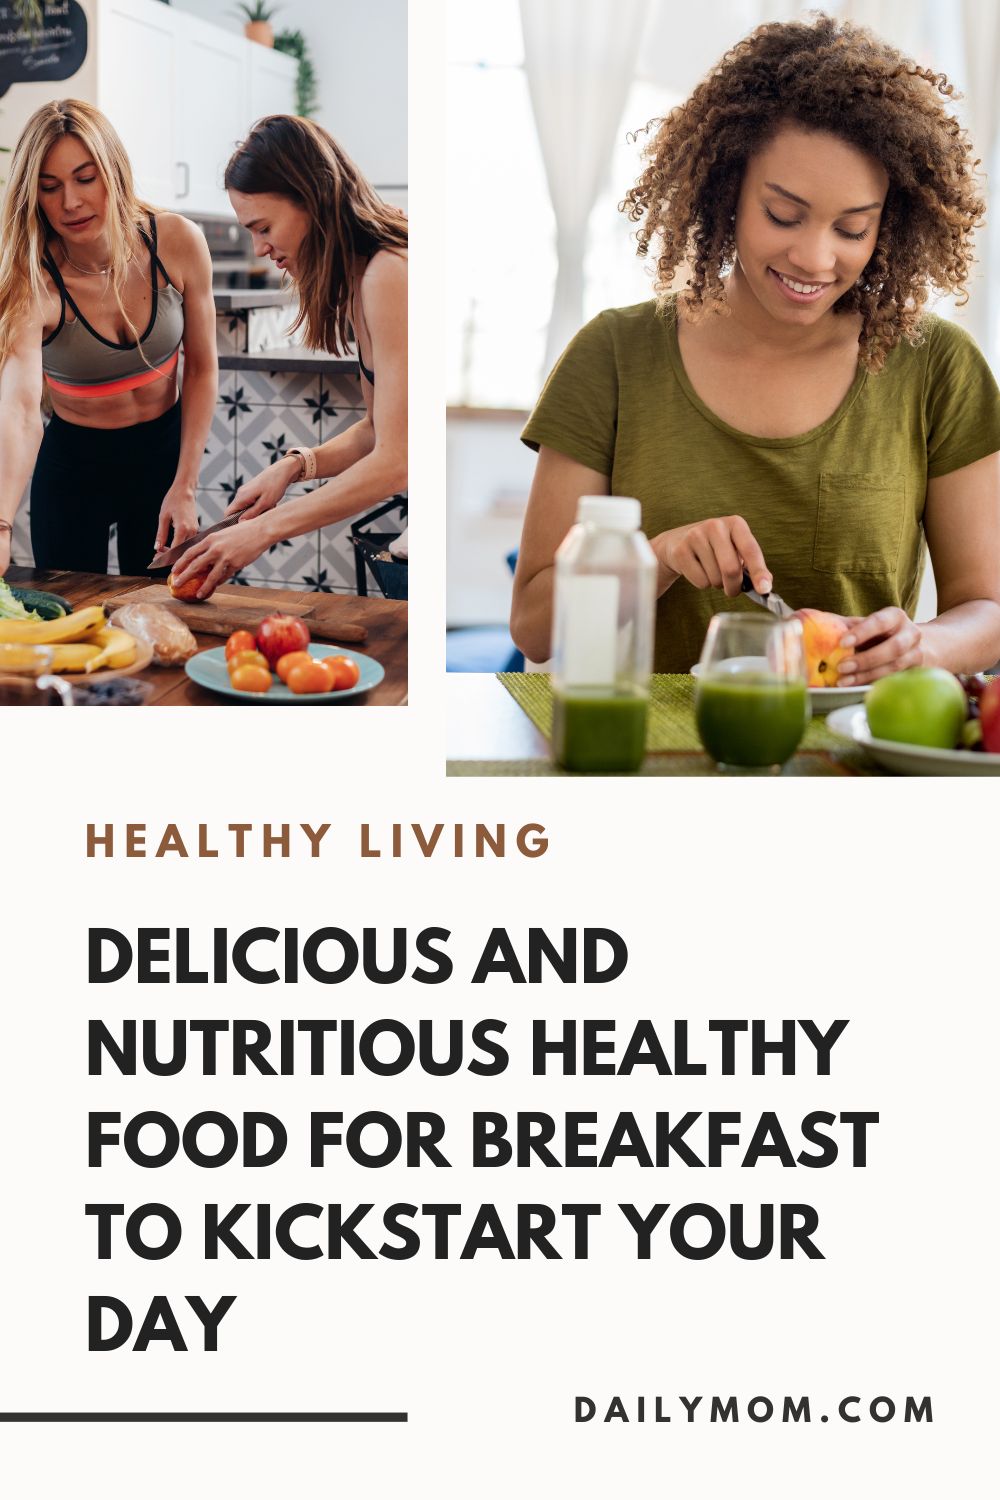 Delicious And Nutritious Healthy Food For Breakfast To Kickstart Your Day 18 Daily Mom, Magazine For Families